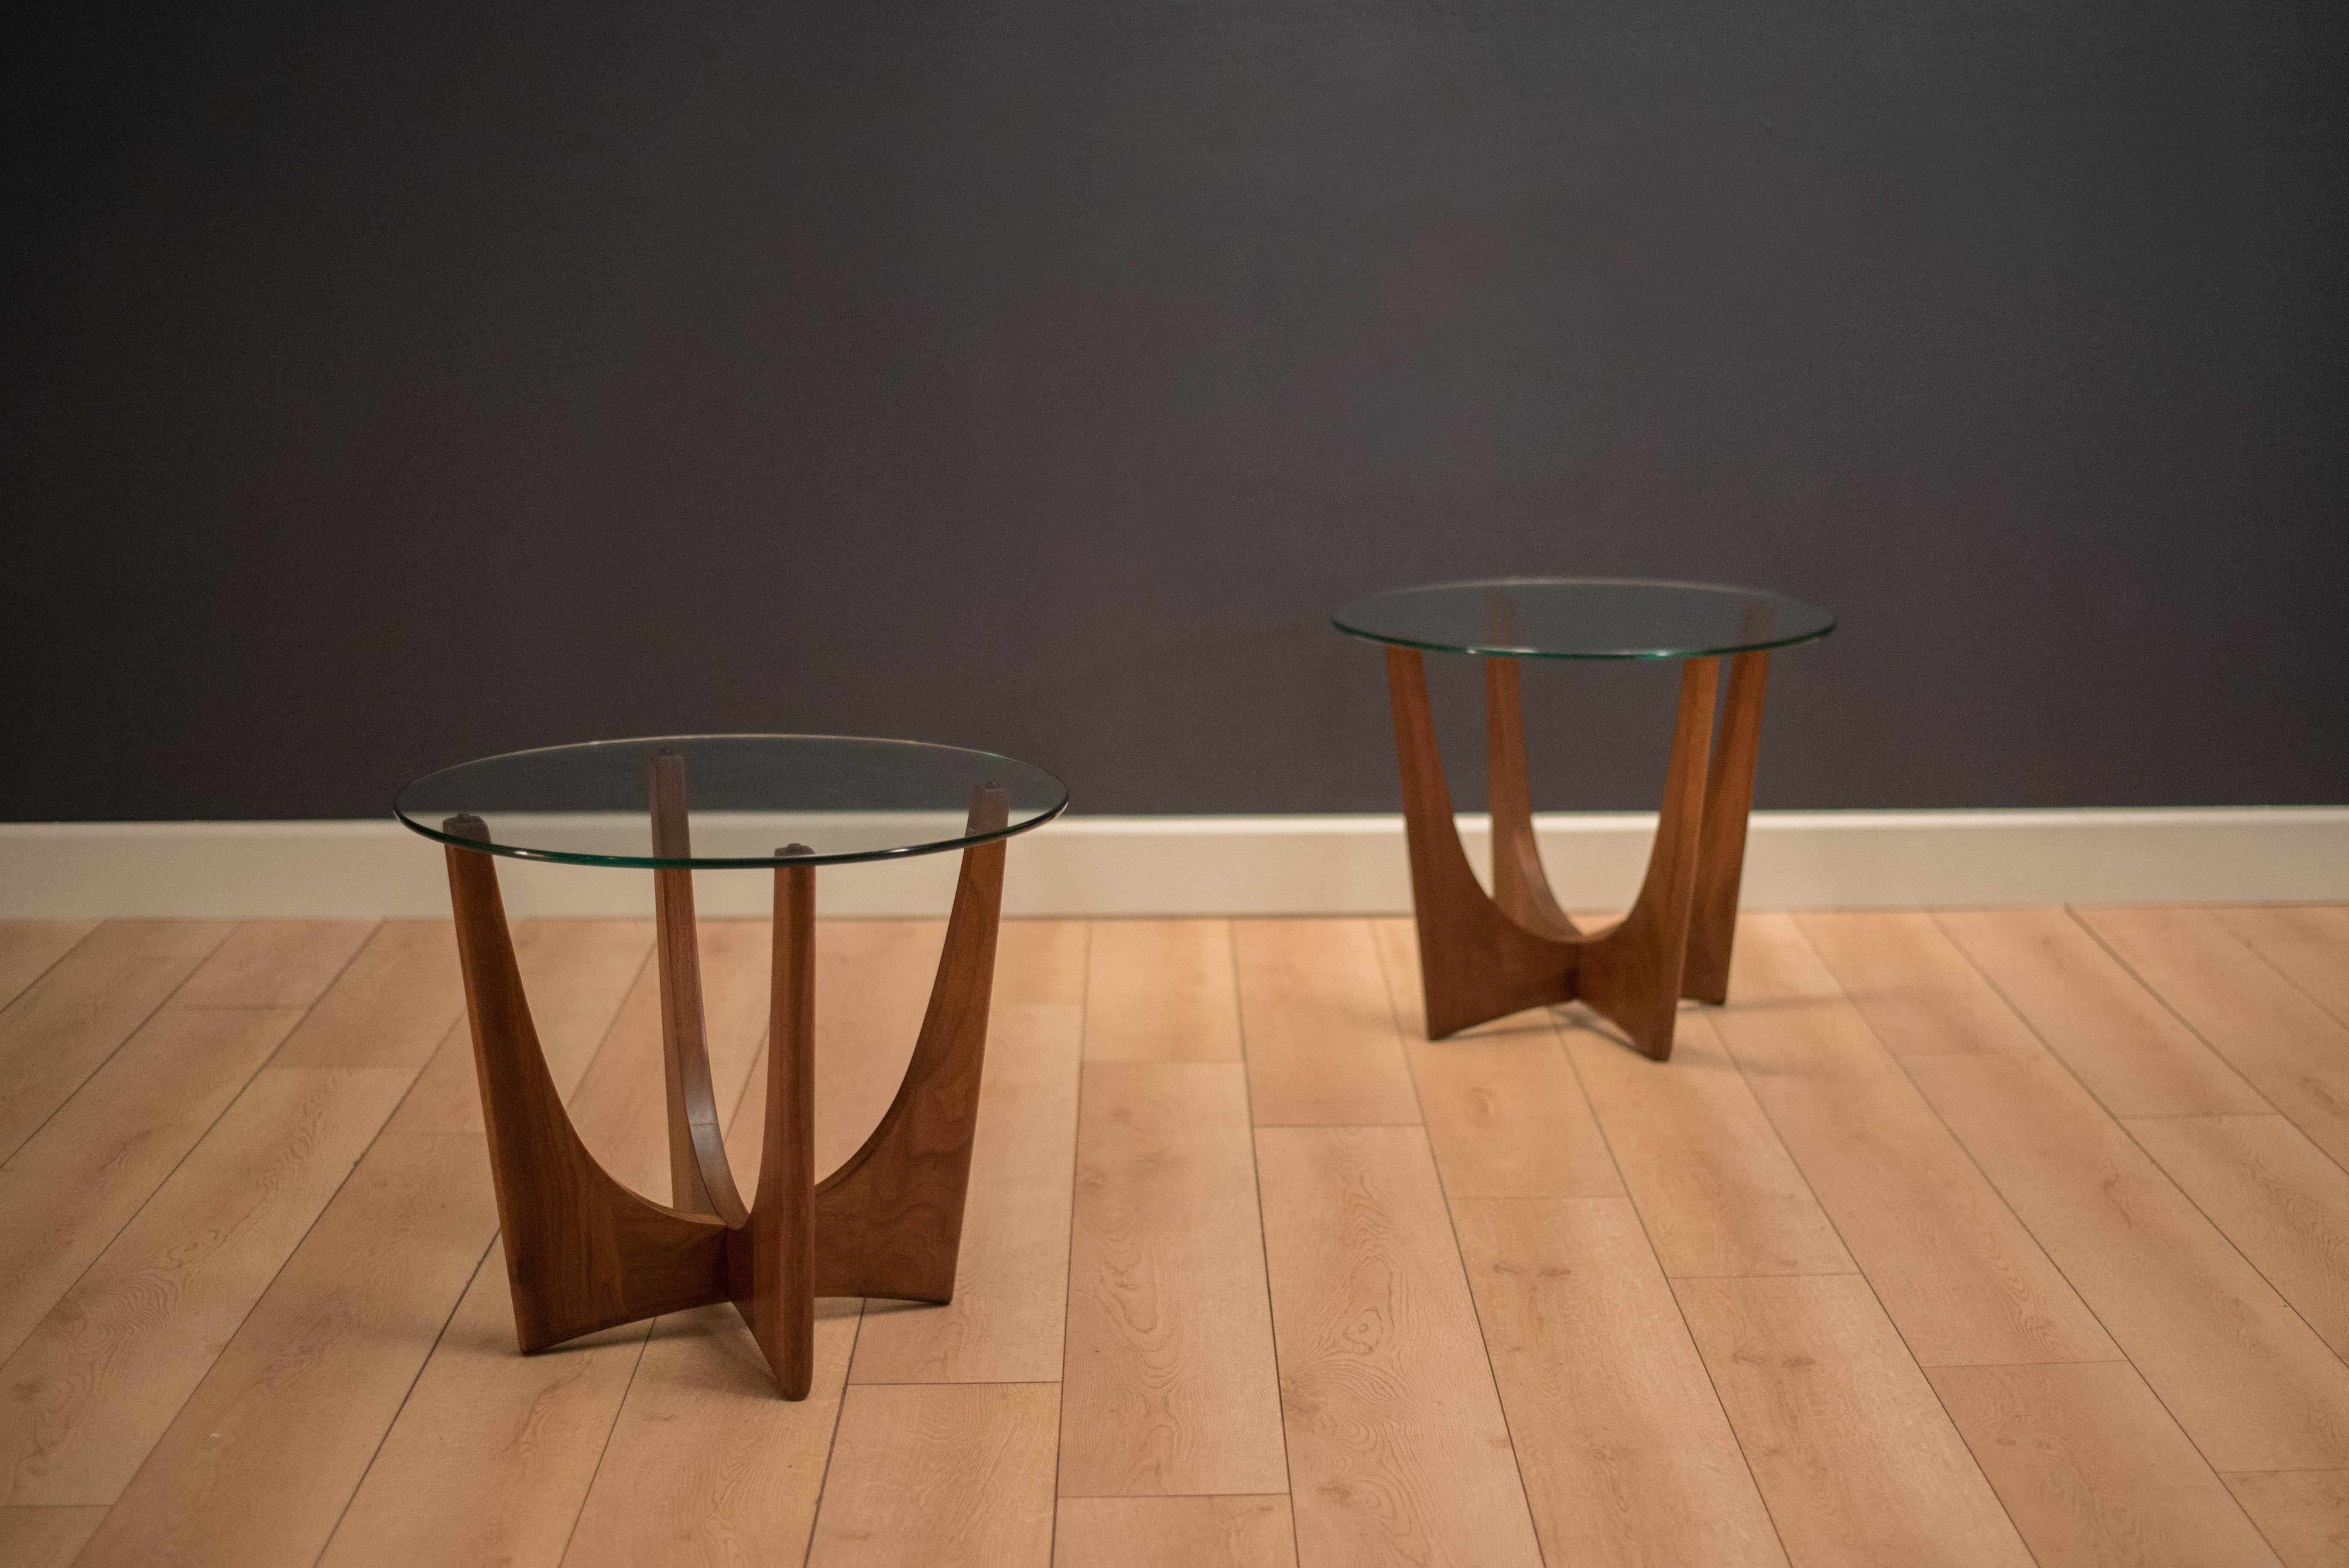 Mid-Century Modern pair of side tables designed by Adrian Pearsall for Craft Associates. This set is made of solid sculpted walnut with a round glass top. Price is for the pair.